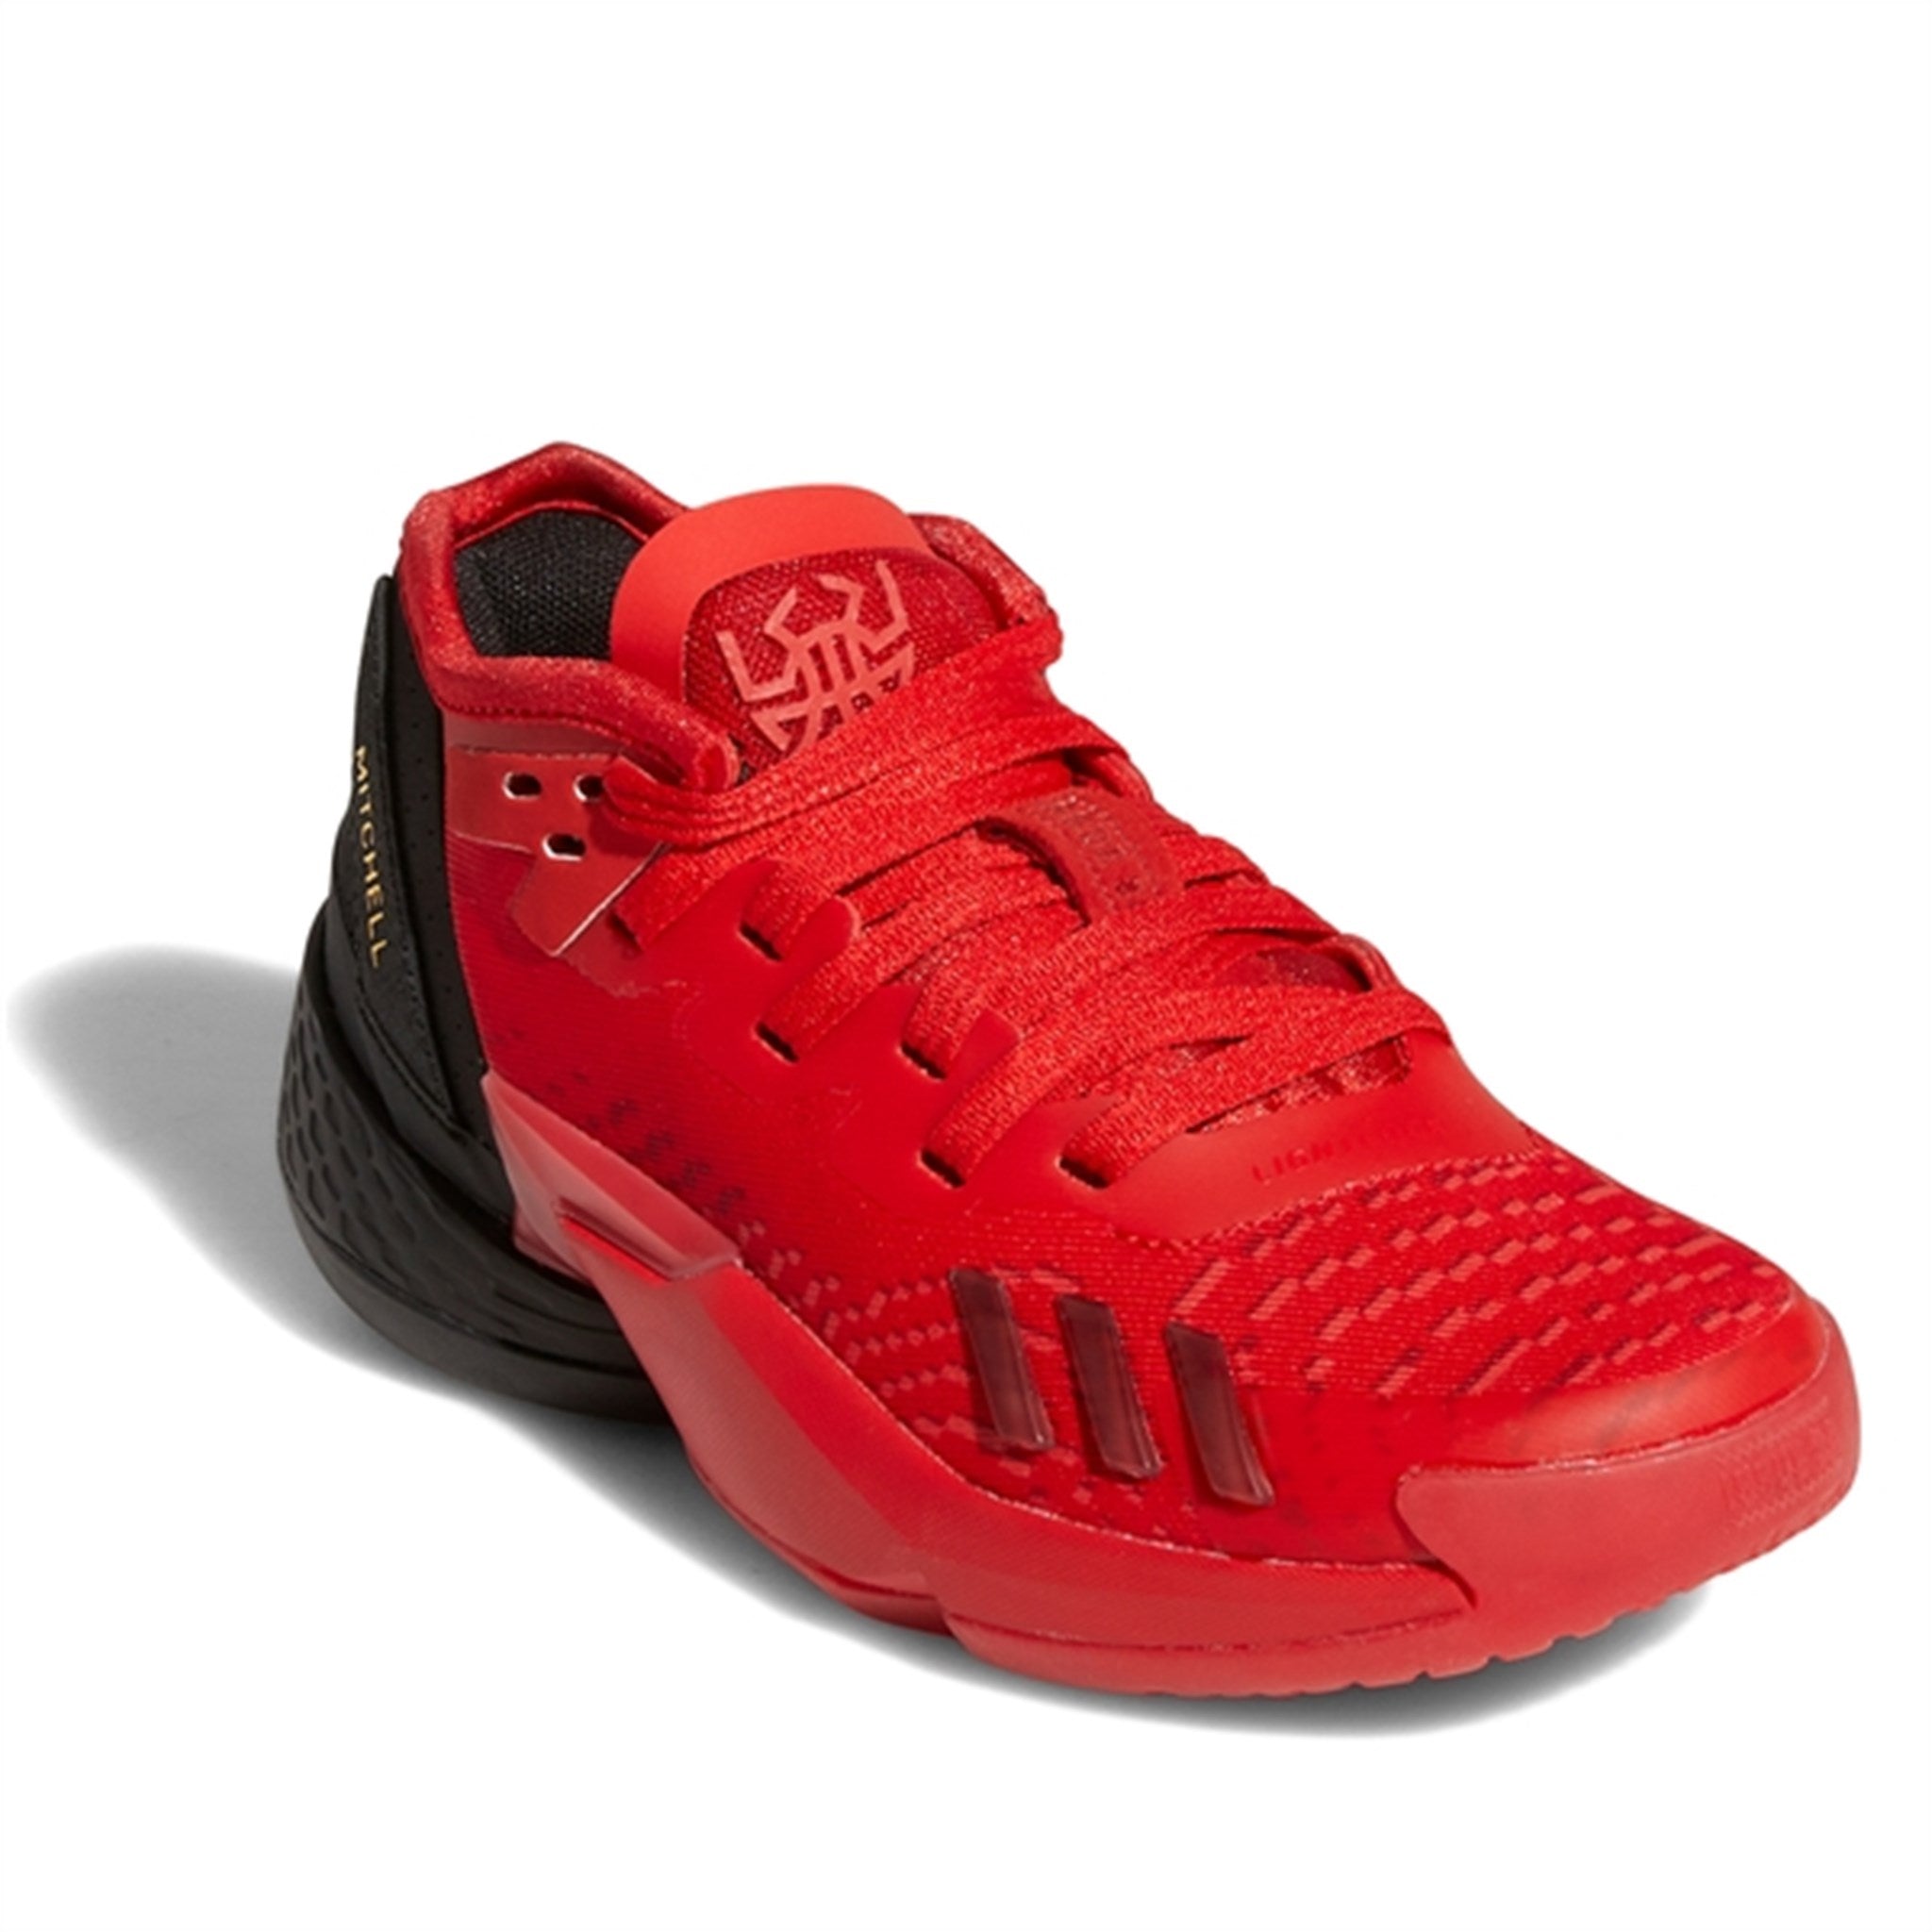 adidas D.O.N. Issue Sneakers Vivid Red 5